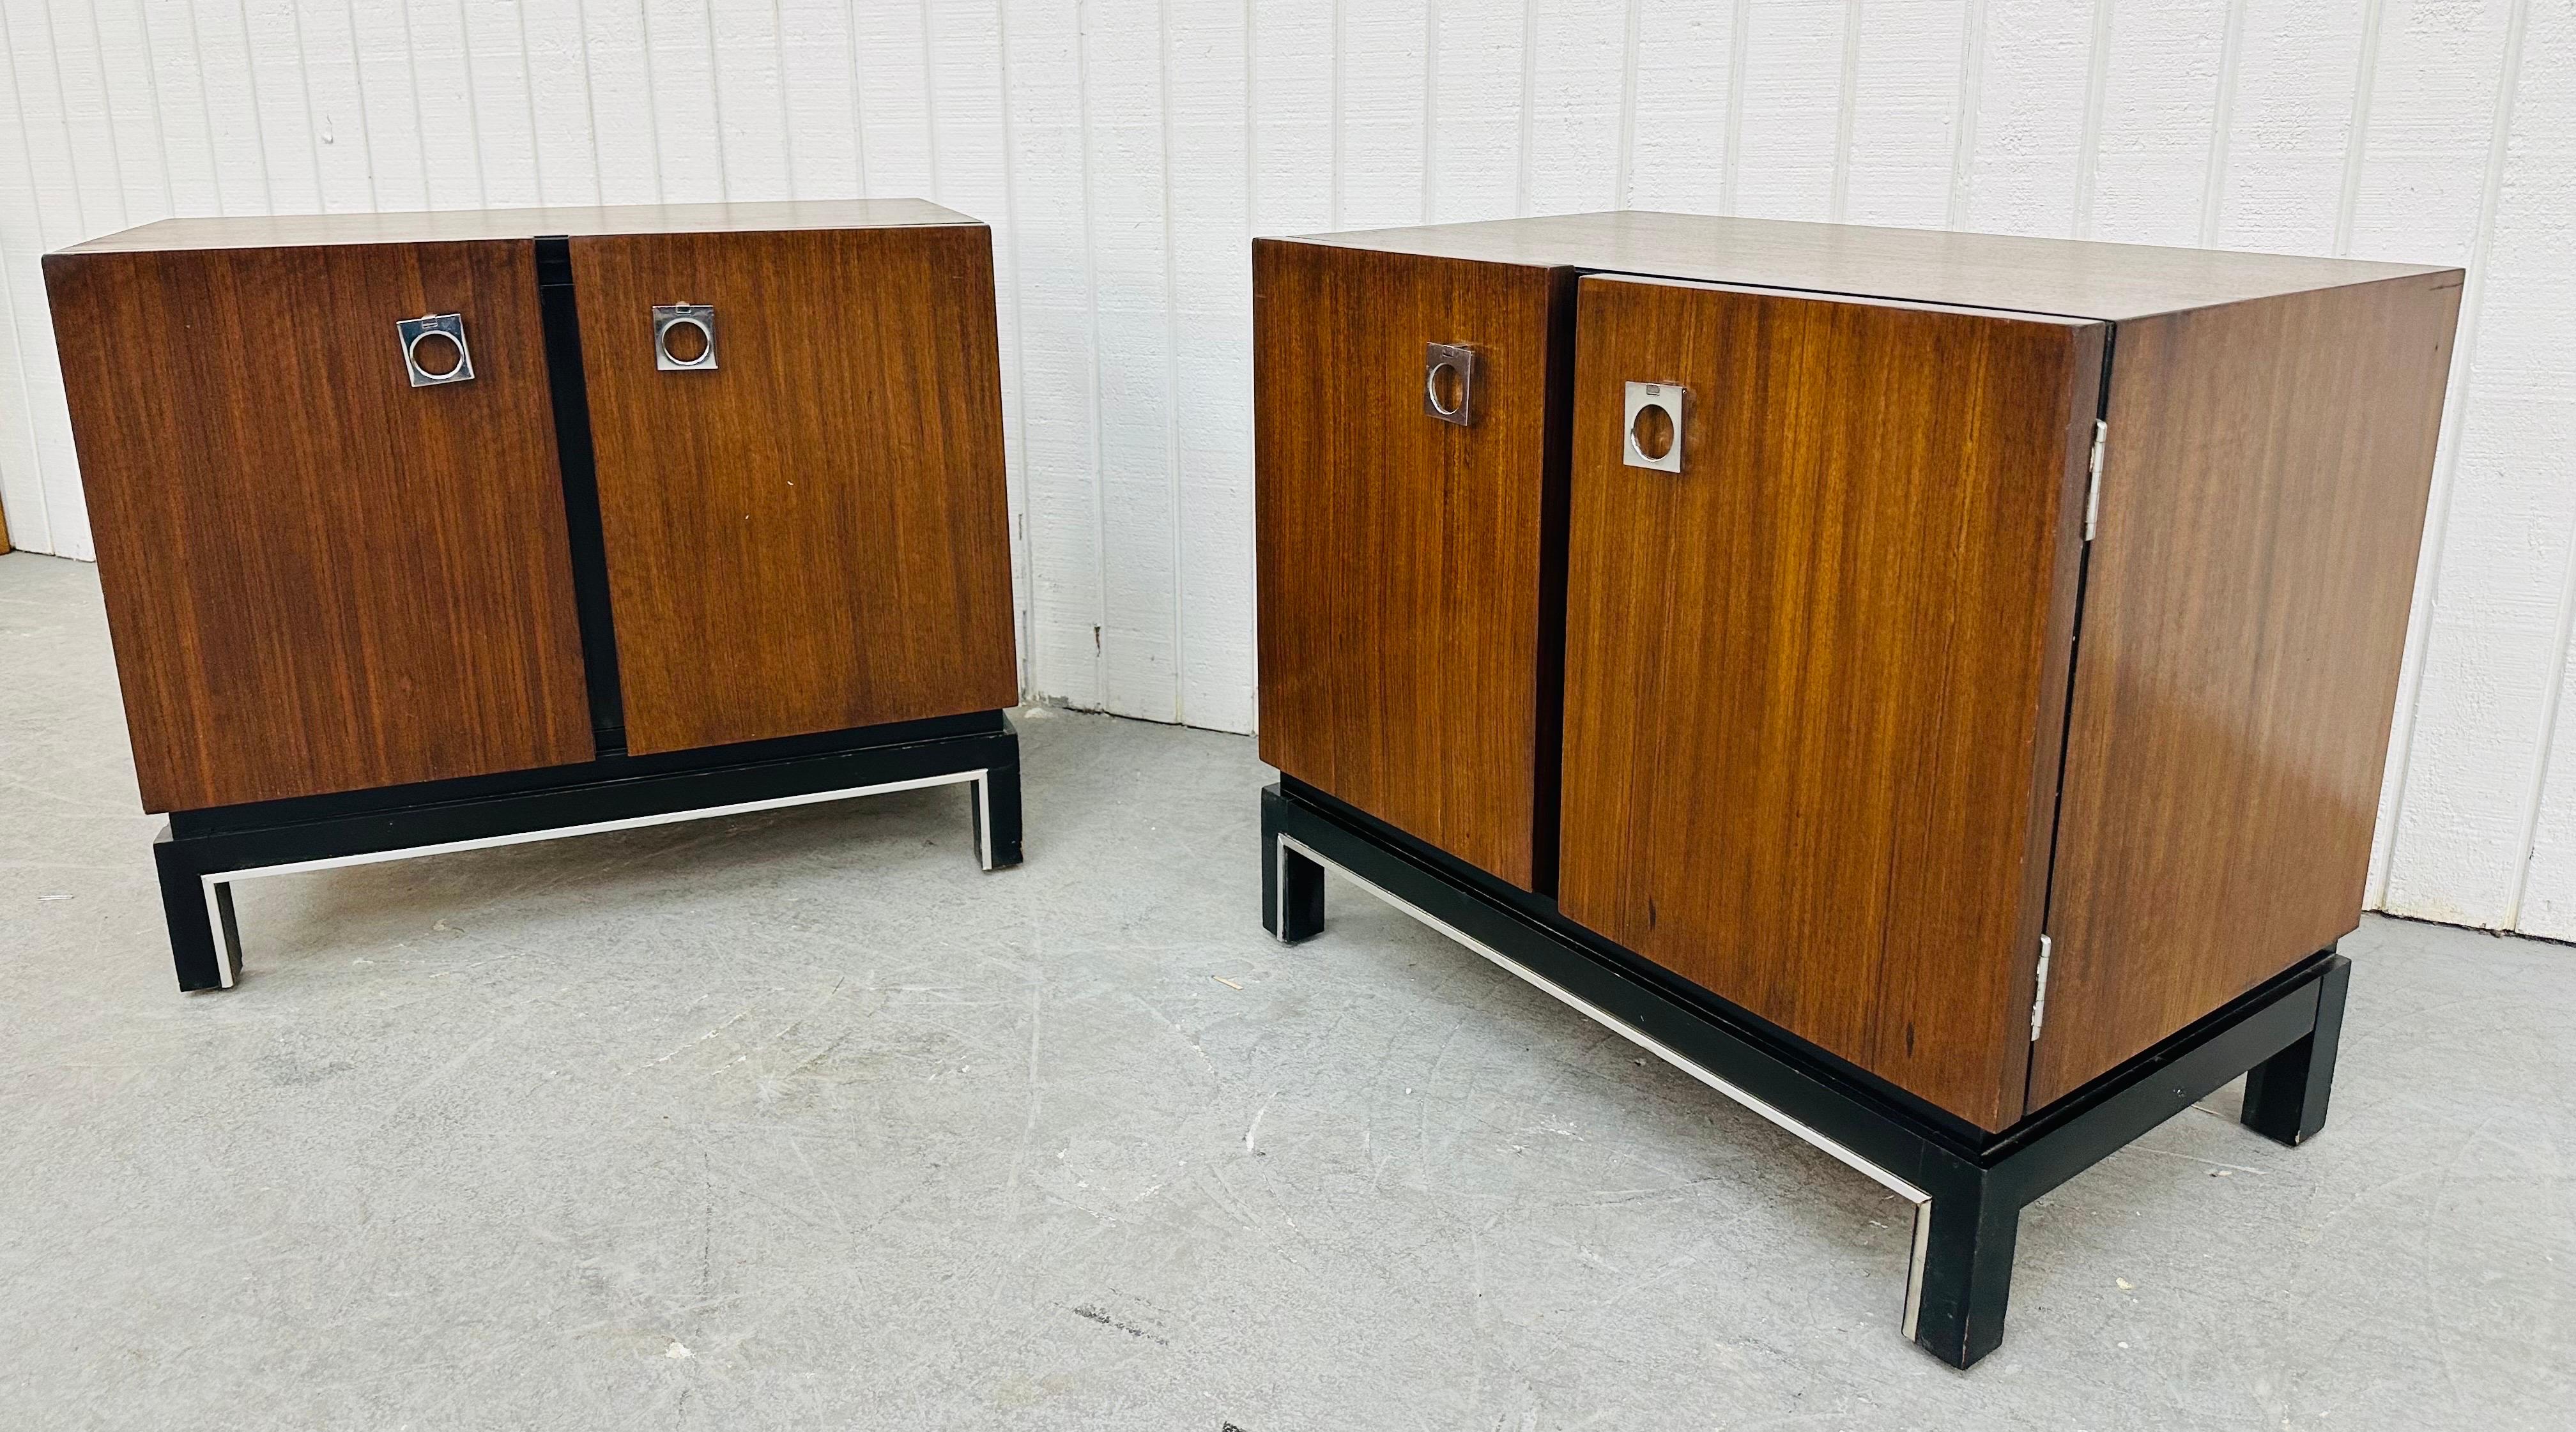 This listing is for a pair of Mid-Century Modern American of Martinsville Walnut Nightstands. Featuring a straight line design, two doors with chrome hardware that open up to a hidden drawer, storage space, black modern legs, and a beautiful walnut